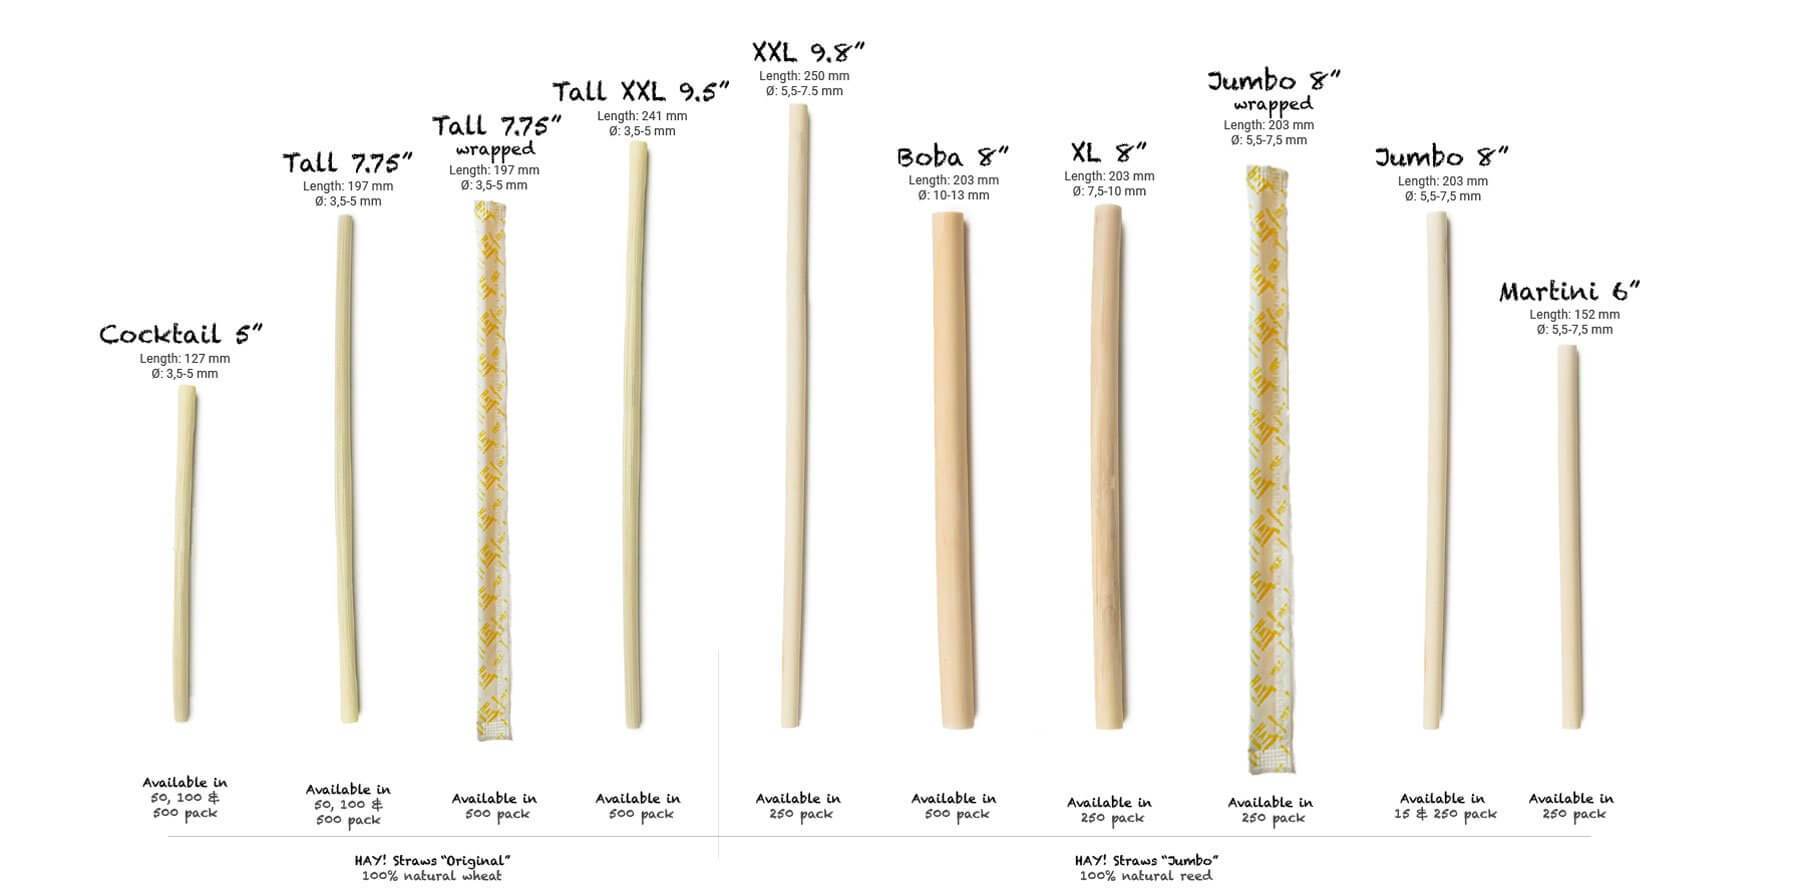 Overview of all sustainable wheat straws and reed straws from StrawZ